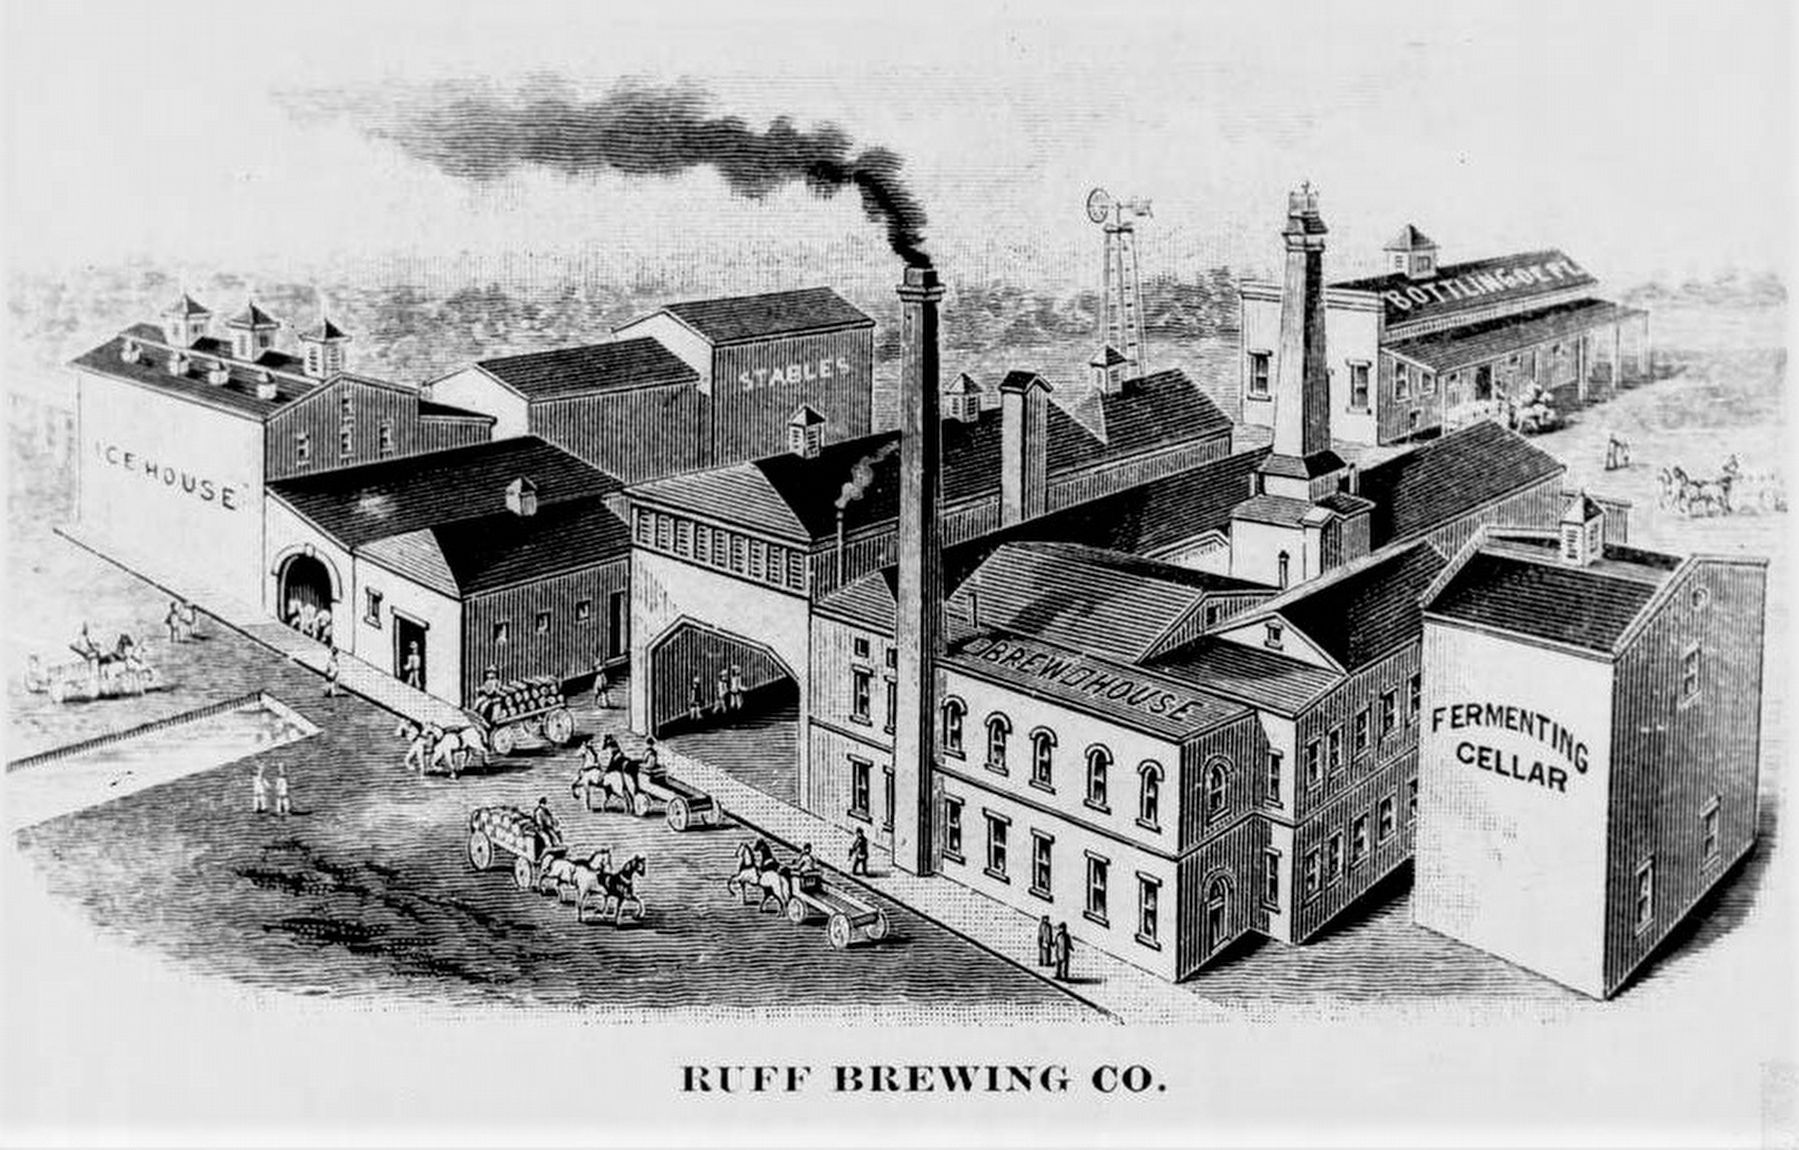 Ruff Brewing Company image. Click for full size.